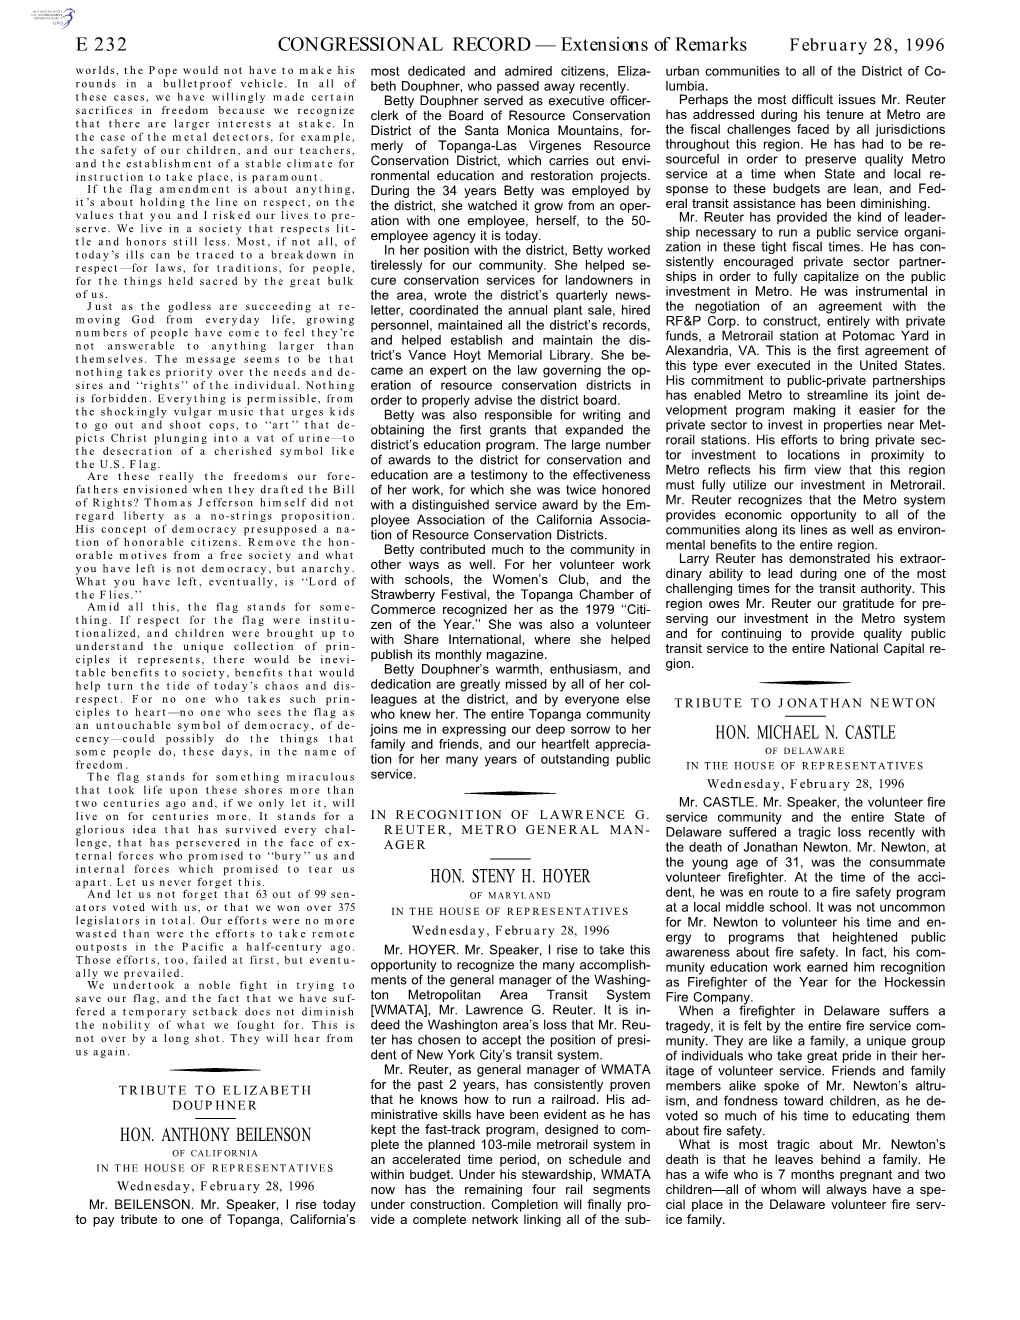 CONGRESSIONAL RECORD— Extensions of Remarks E 232 HON. ANTHONY BEILENSON HON. STENY H. HOYER HON. MICHAEL N. CASTLE